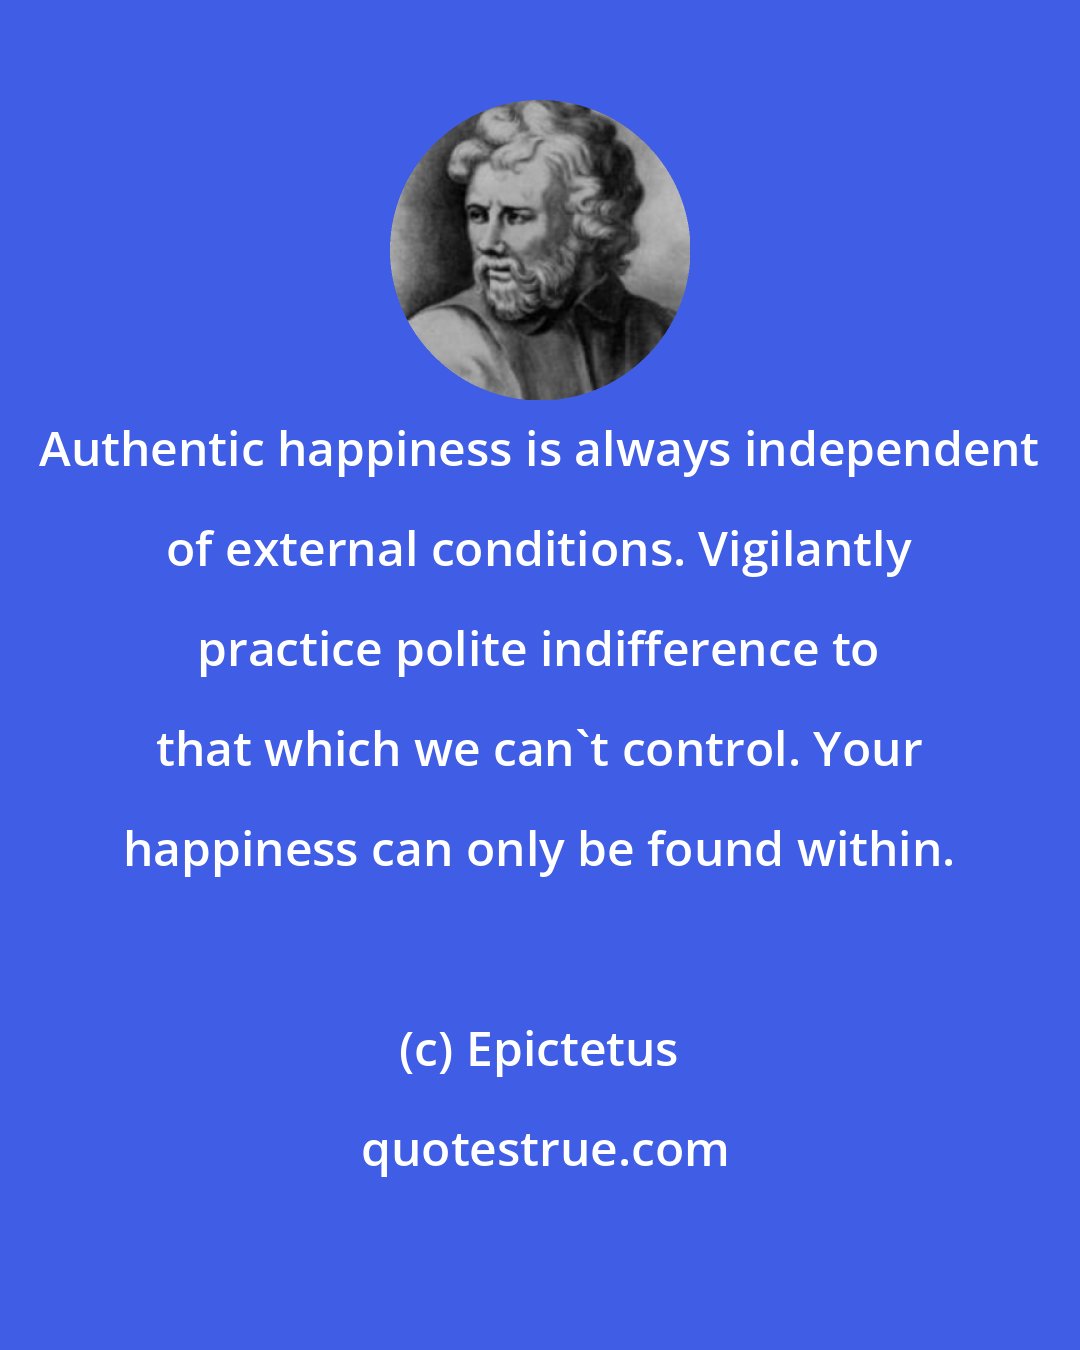 Epictetus: Authentic happiness is always independent of external conditions. Vigilantly practice polite indifference to that which we can't control. Your happiness can only be found within.